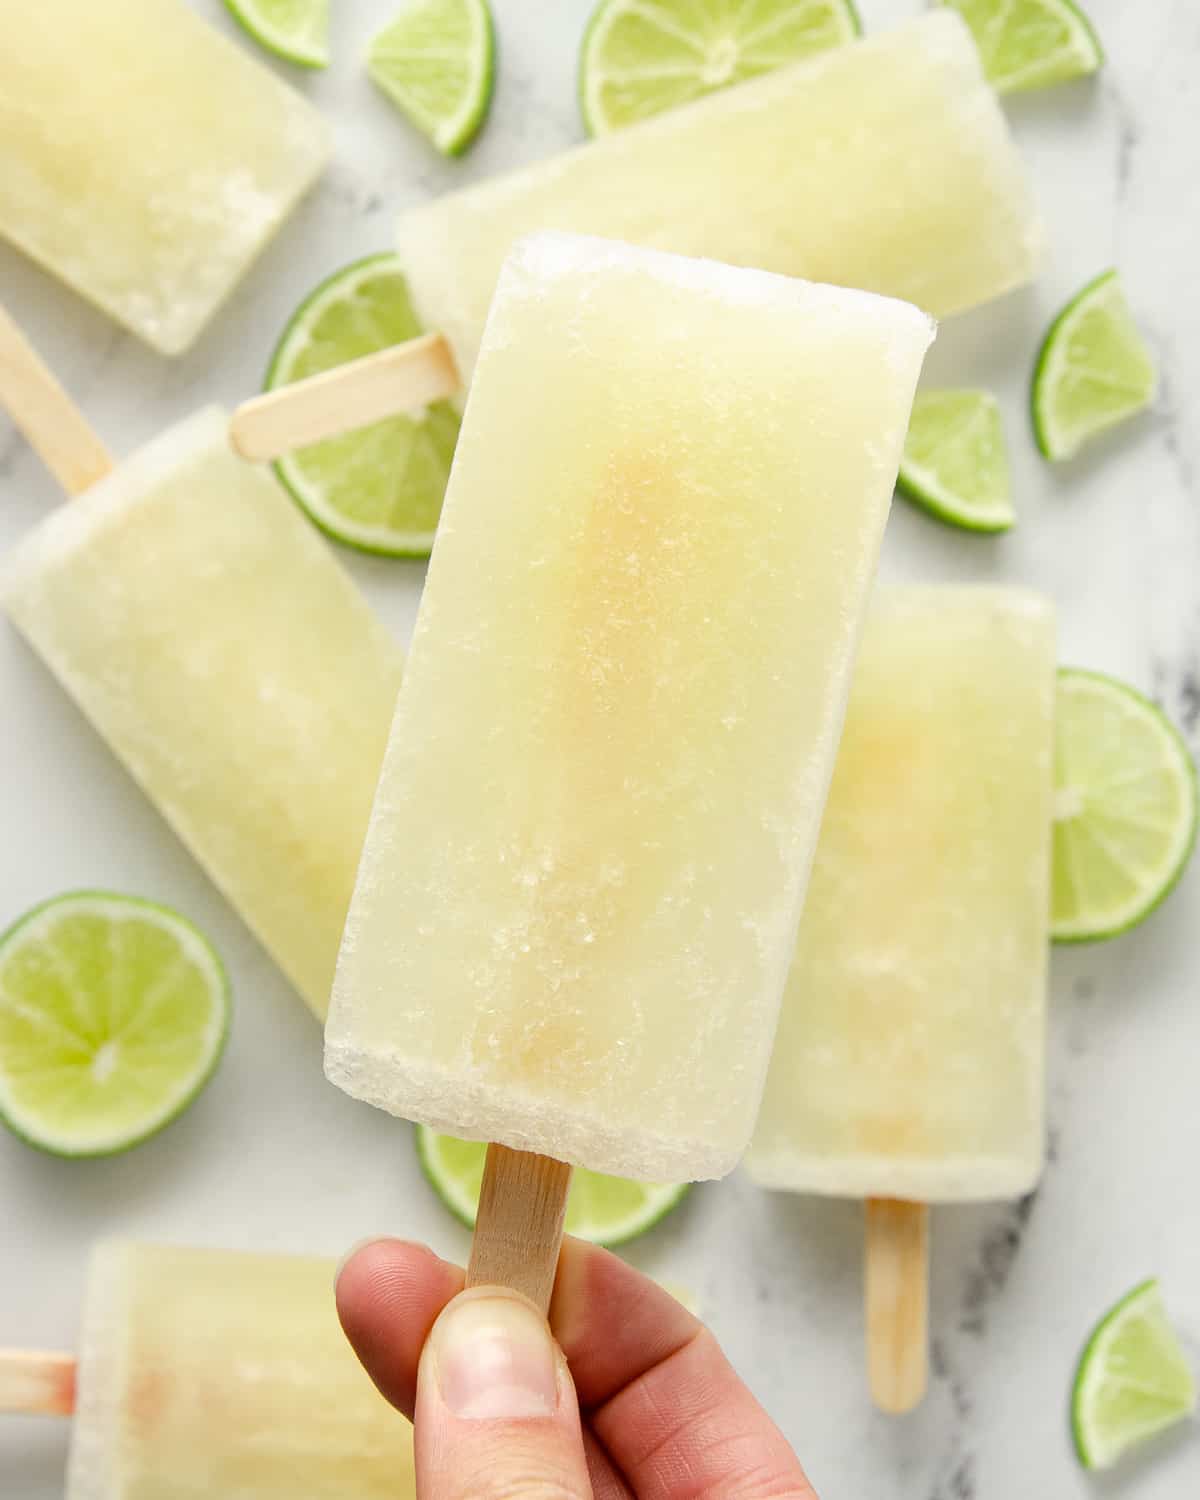 A hand holding a lime popsicle over a few other popsicles on the table.